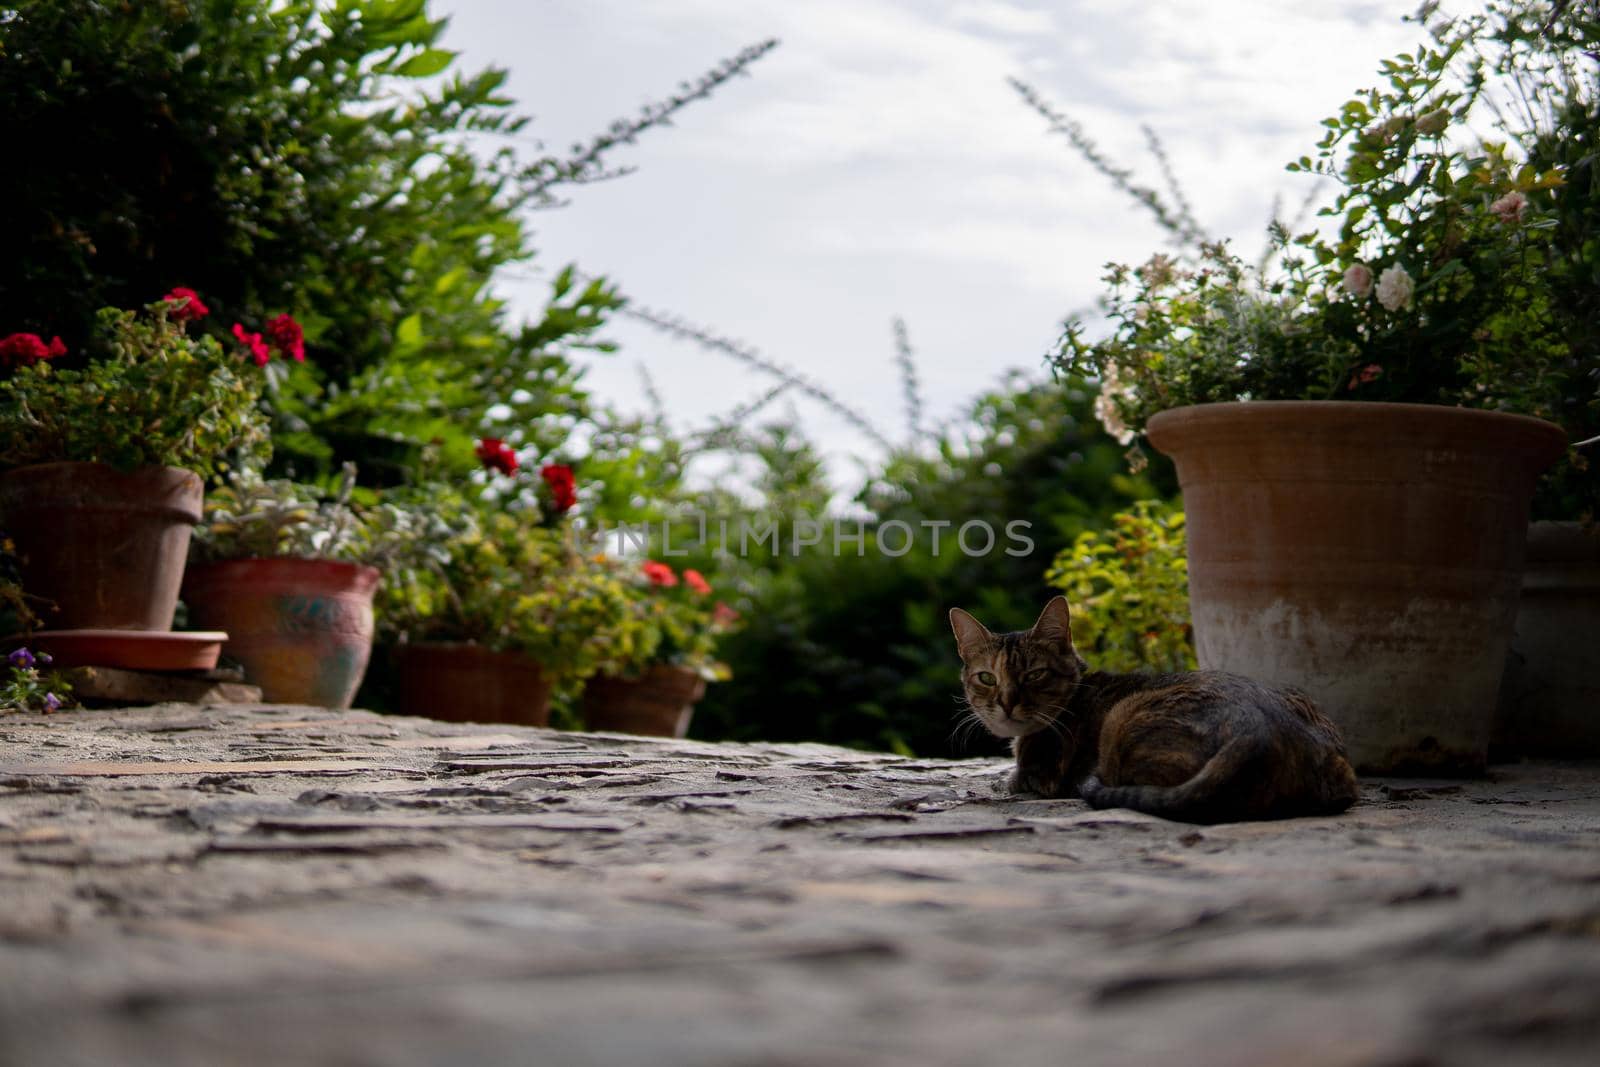 Kitten lying down and surrounded by plants in spring